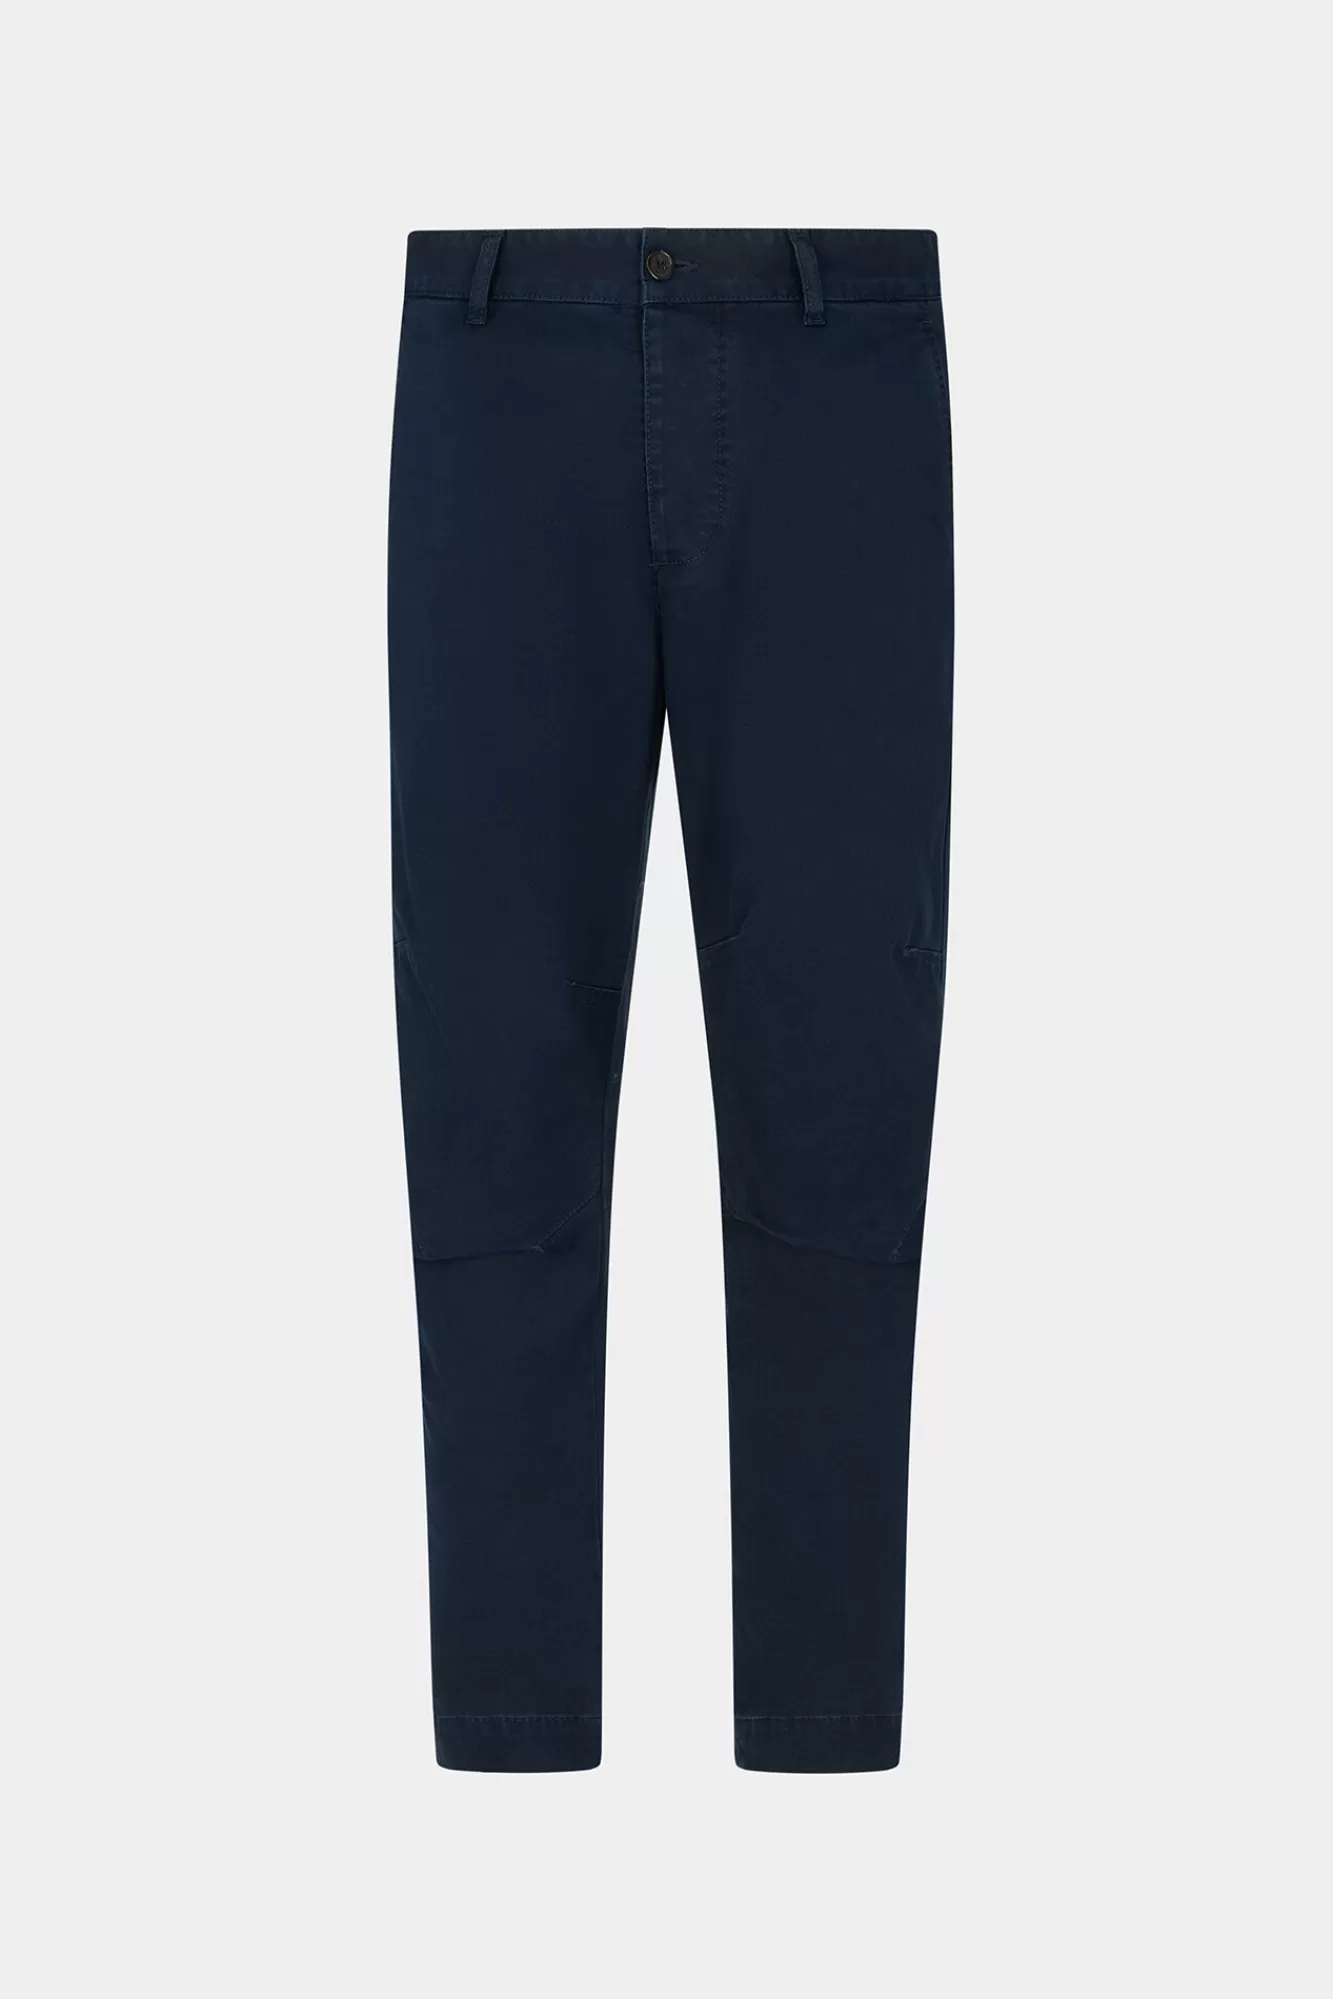 D2 Sexy Chino Pants<Dsquared2 New